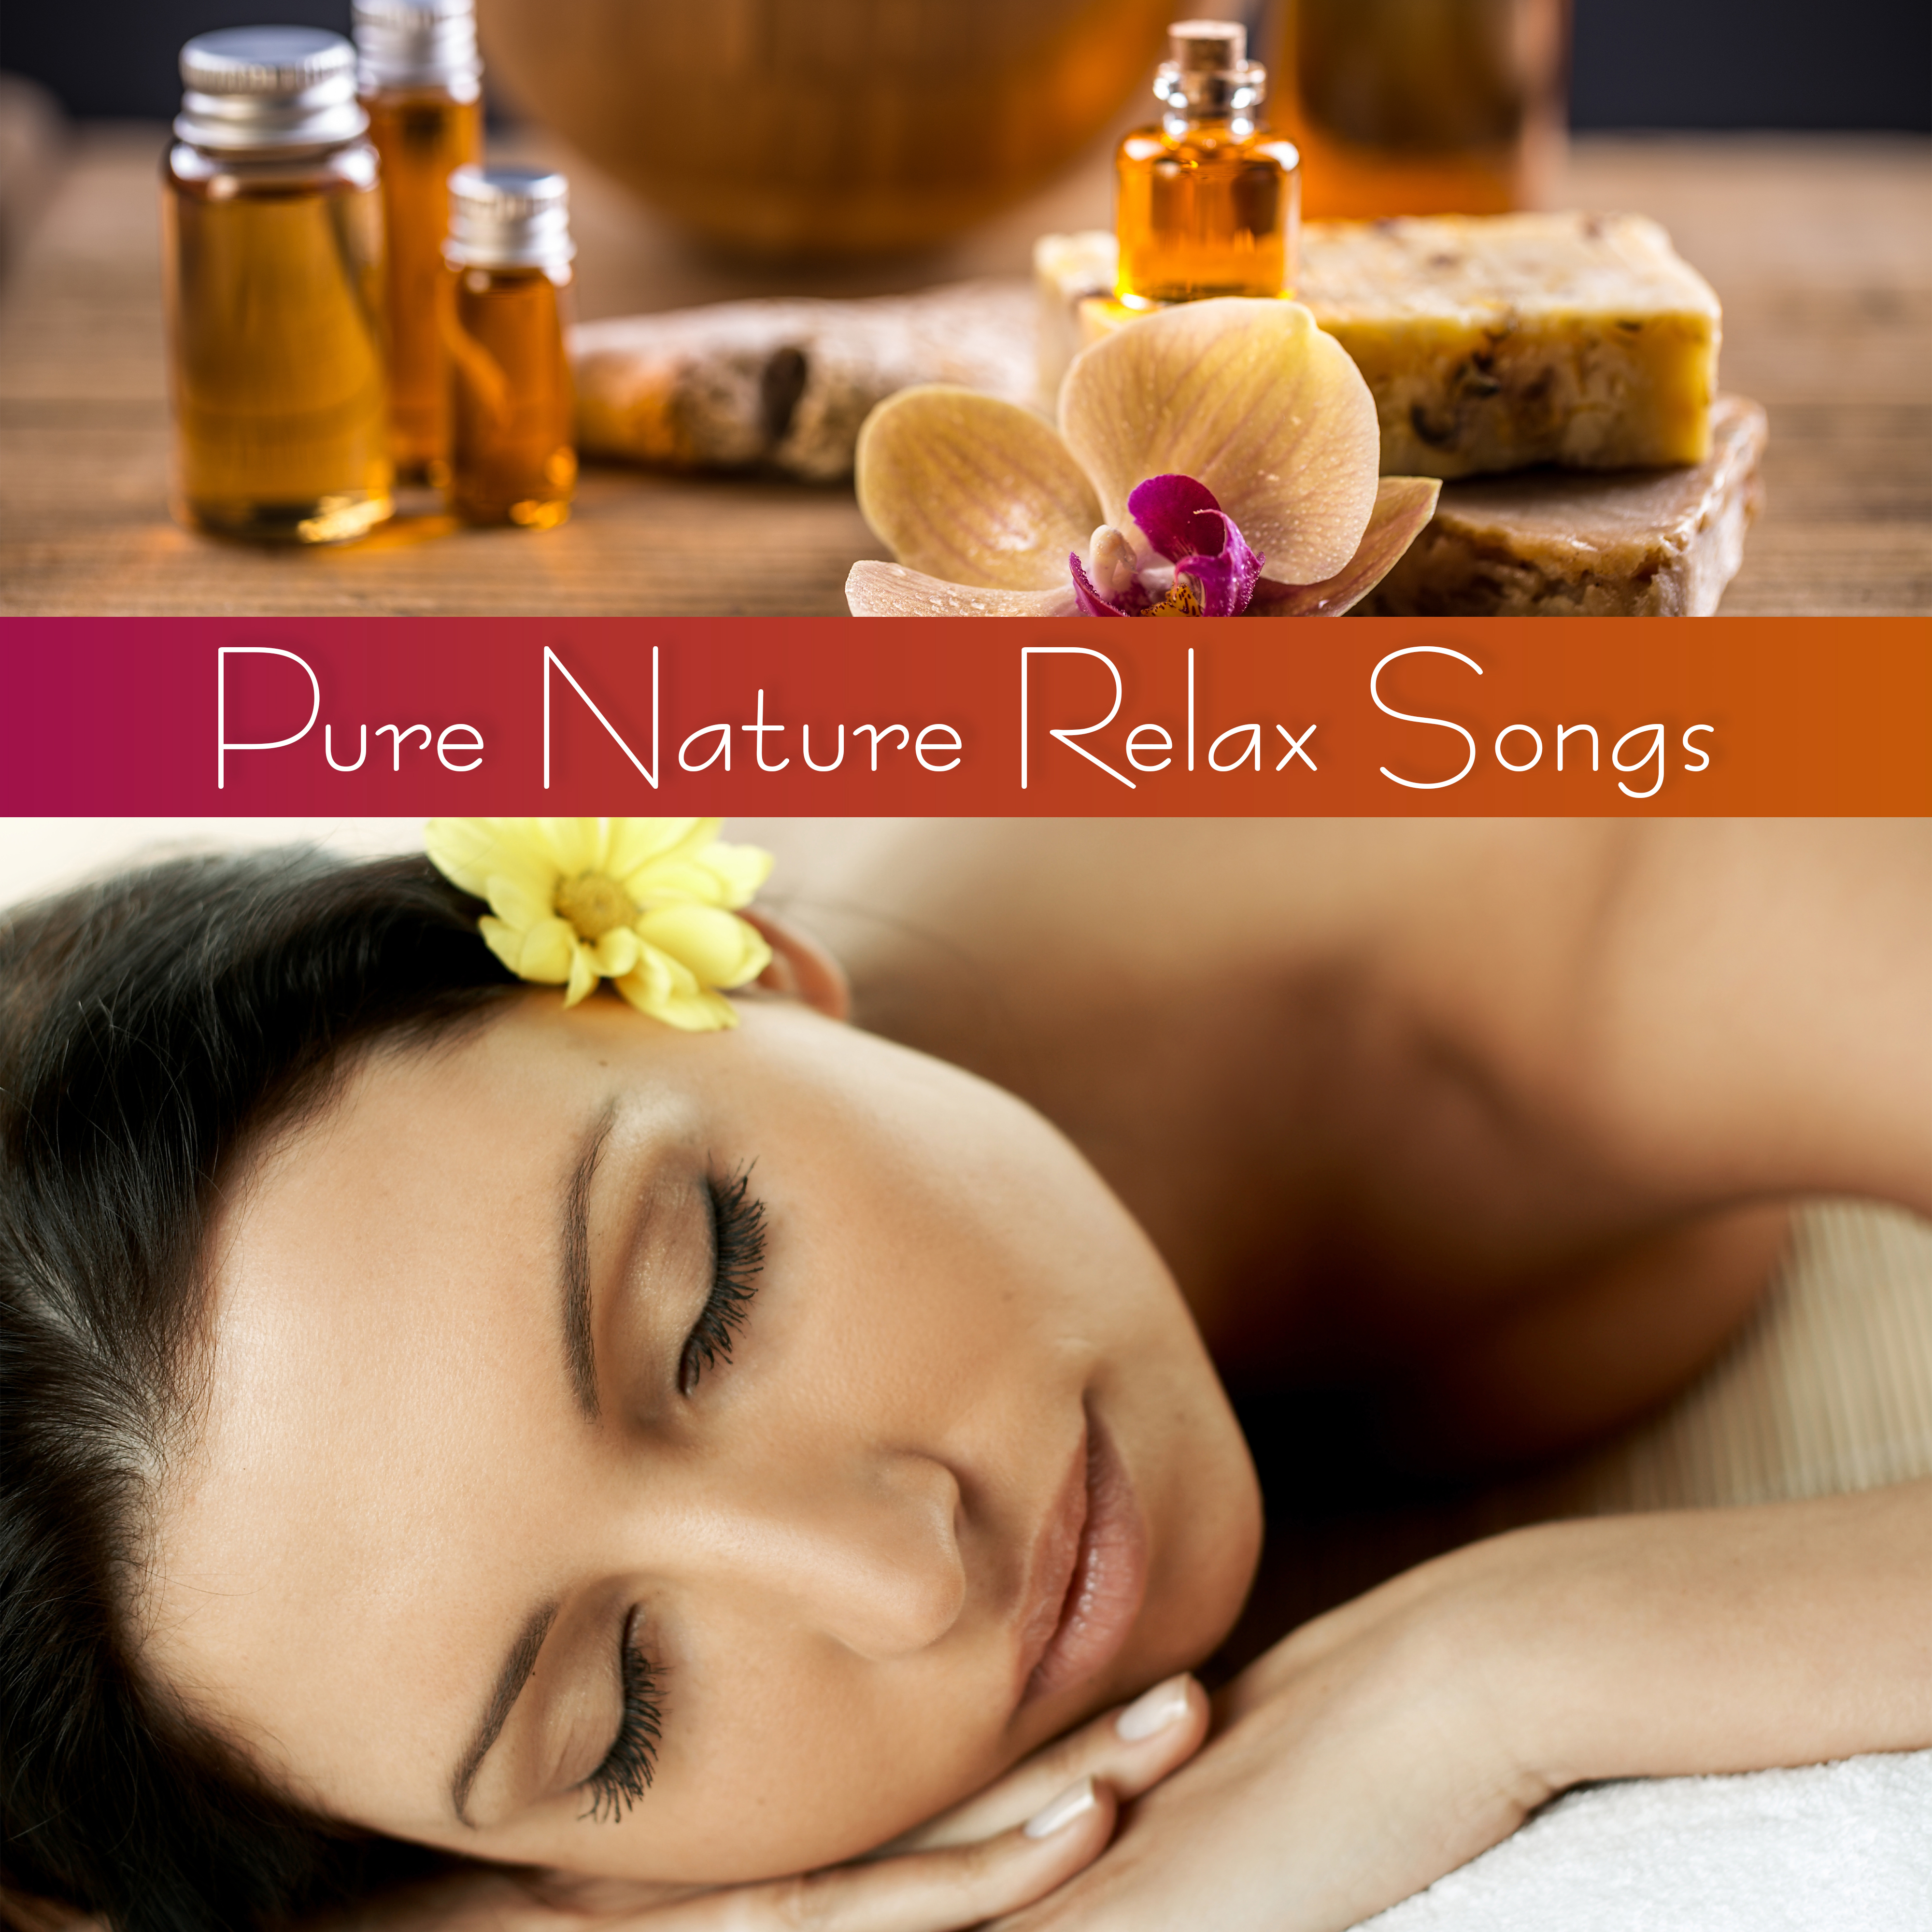 Pure Nature Relax Songs – Spa & Wellness Perfect New Age Music Compilation, Massage Therapy Sounds, Soothing Spa